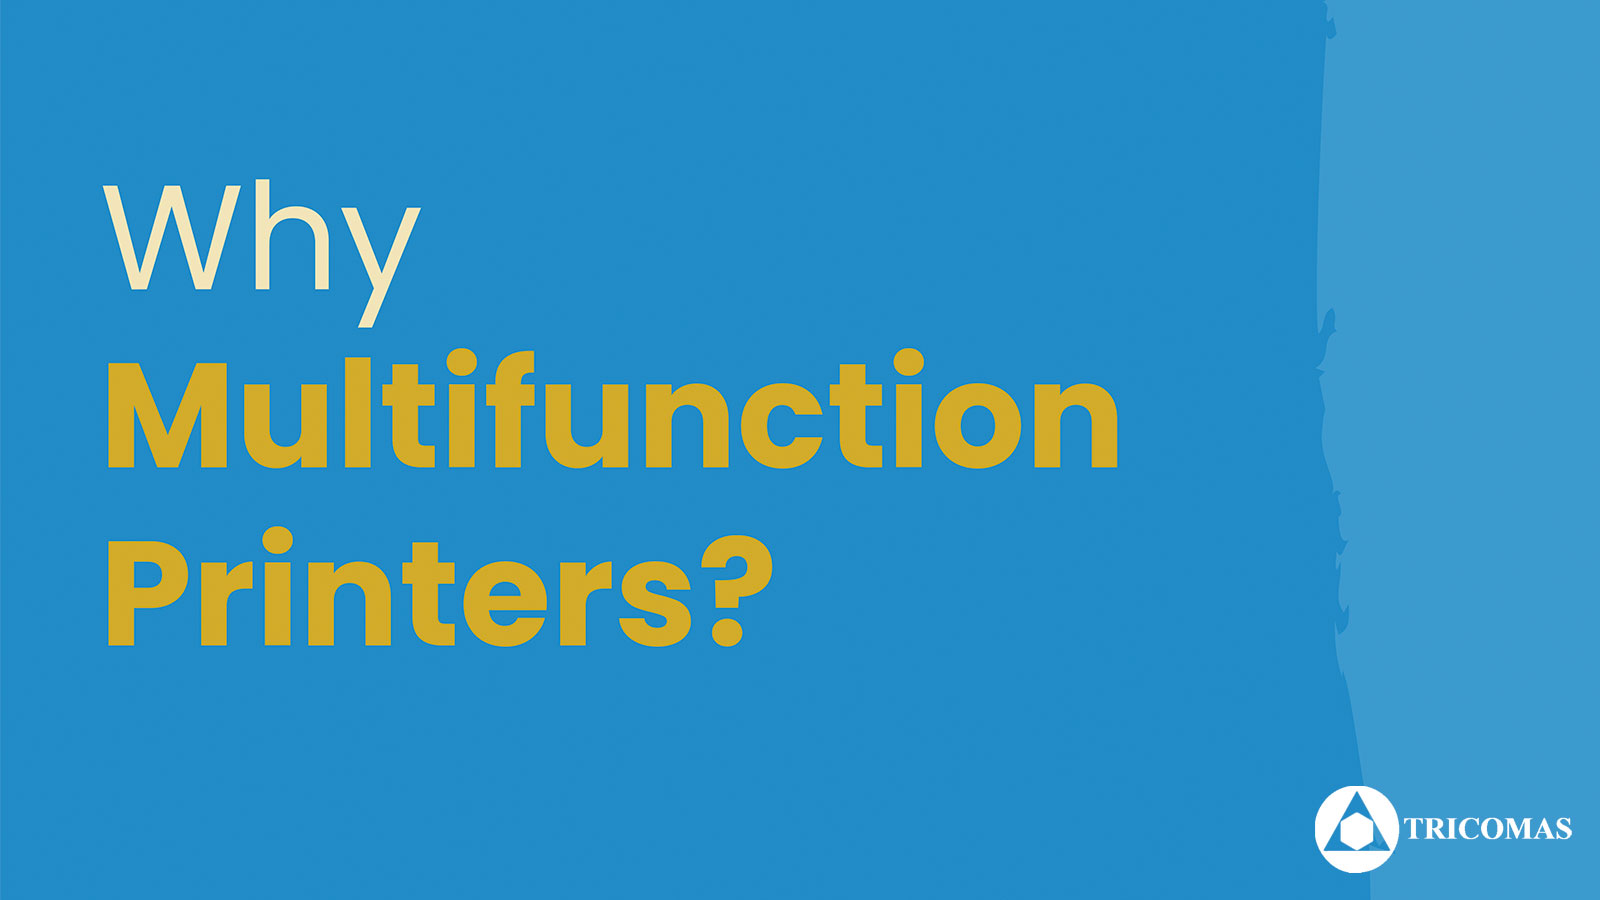 Why Multifunction Printers?